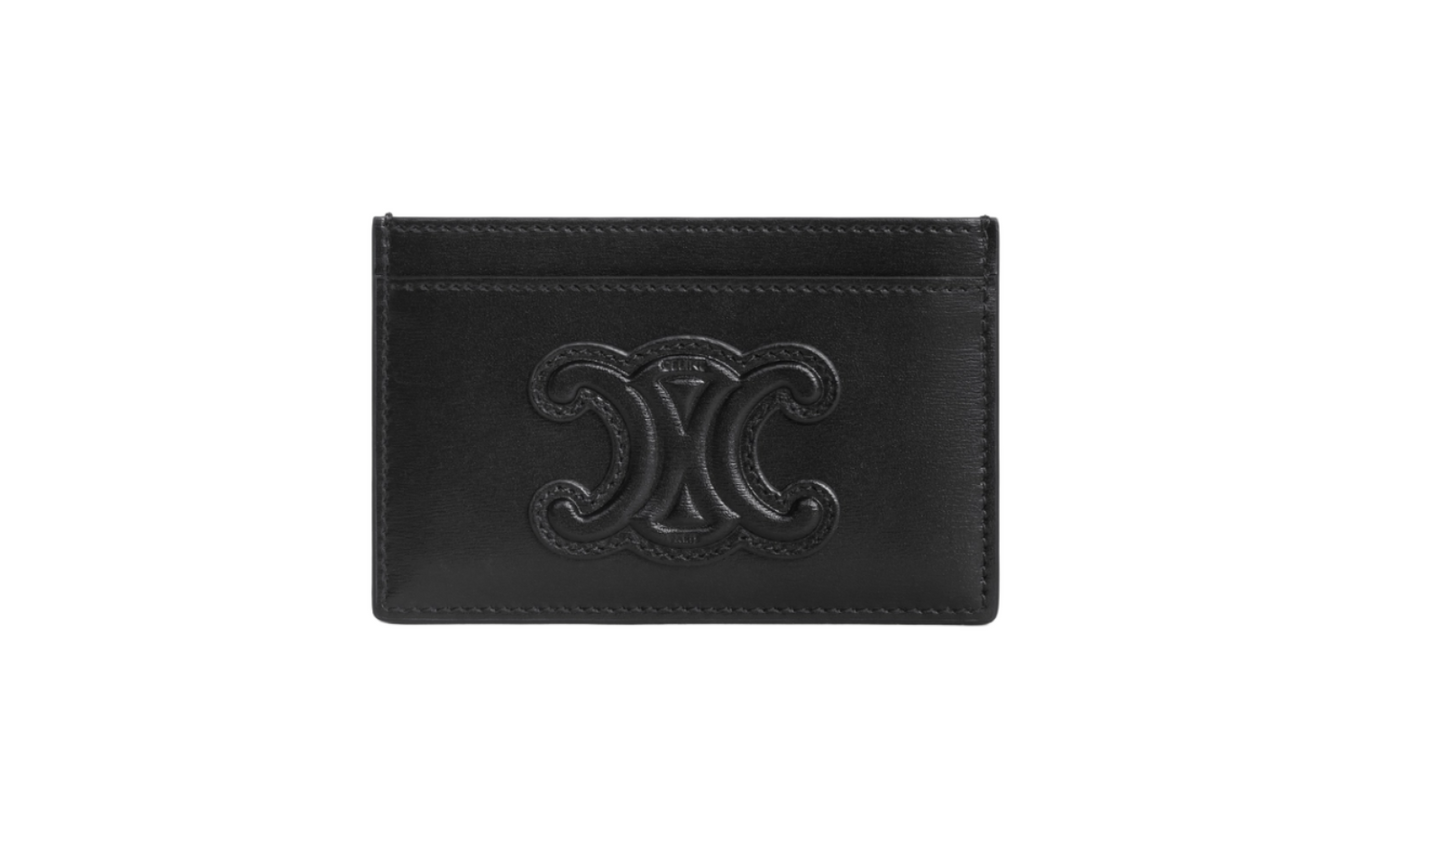 The Triomphe Cardholder